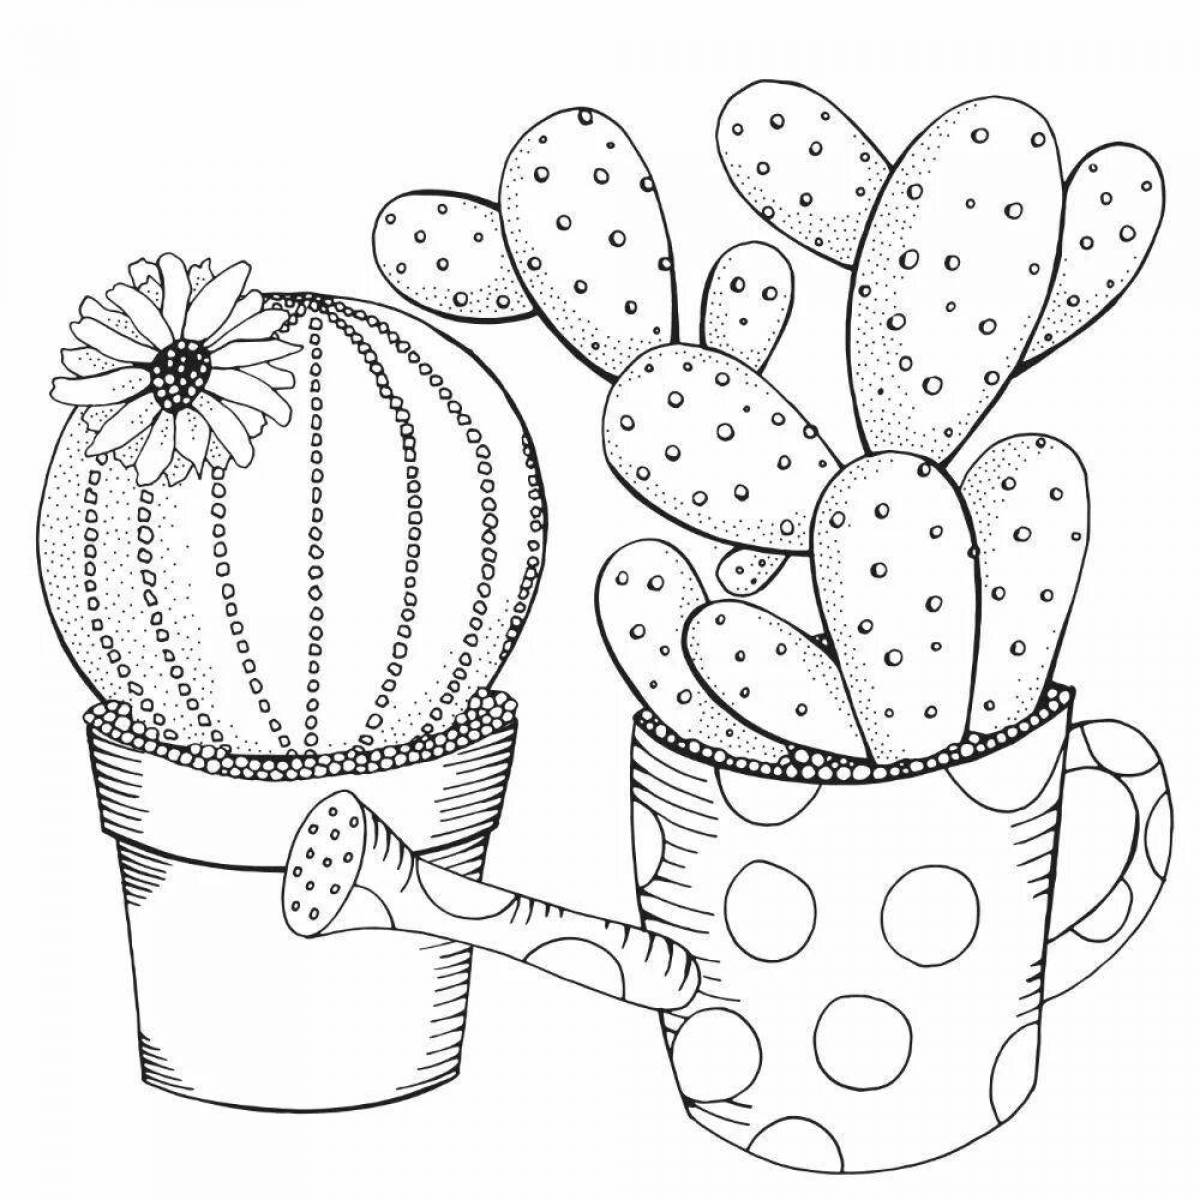 Inspirational cactus coloring page